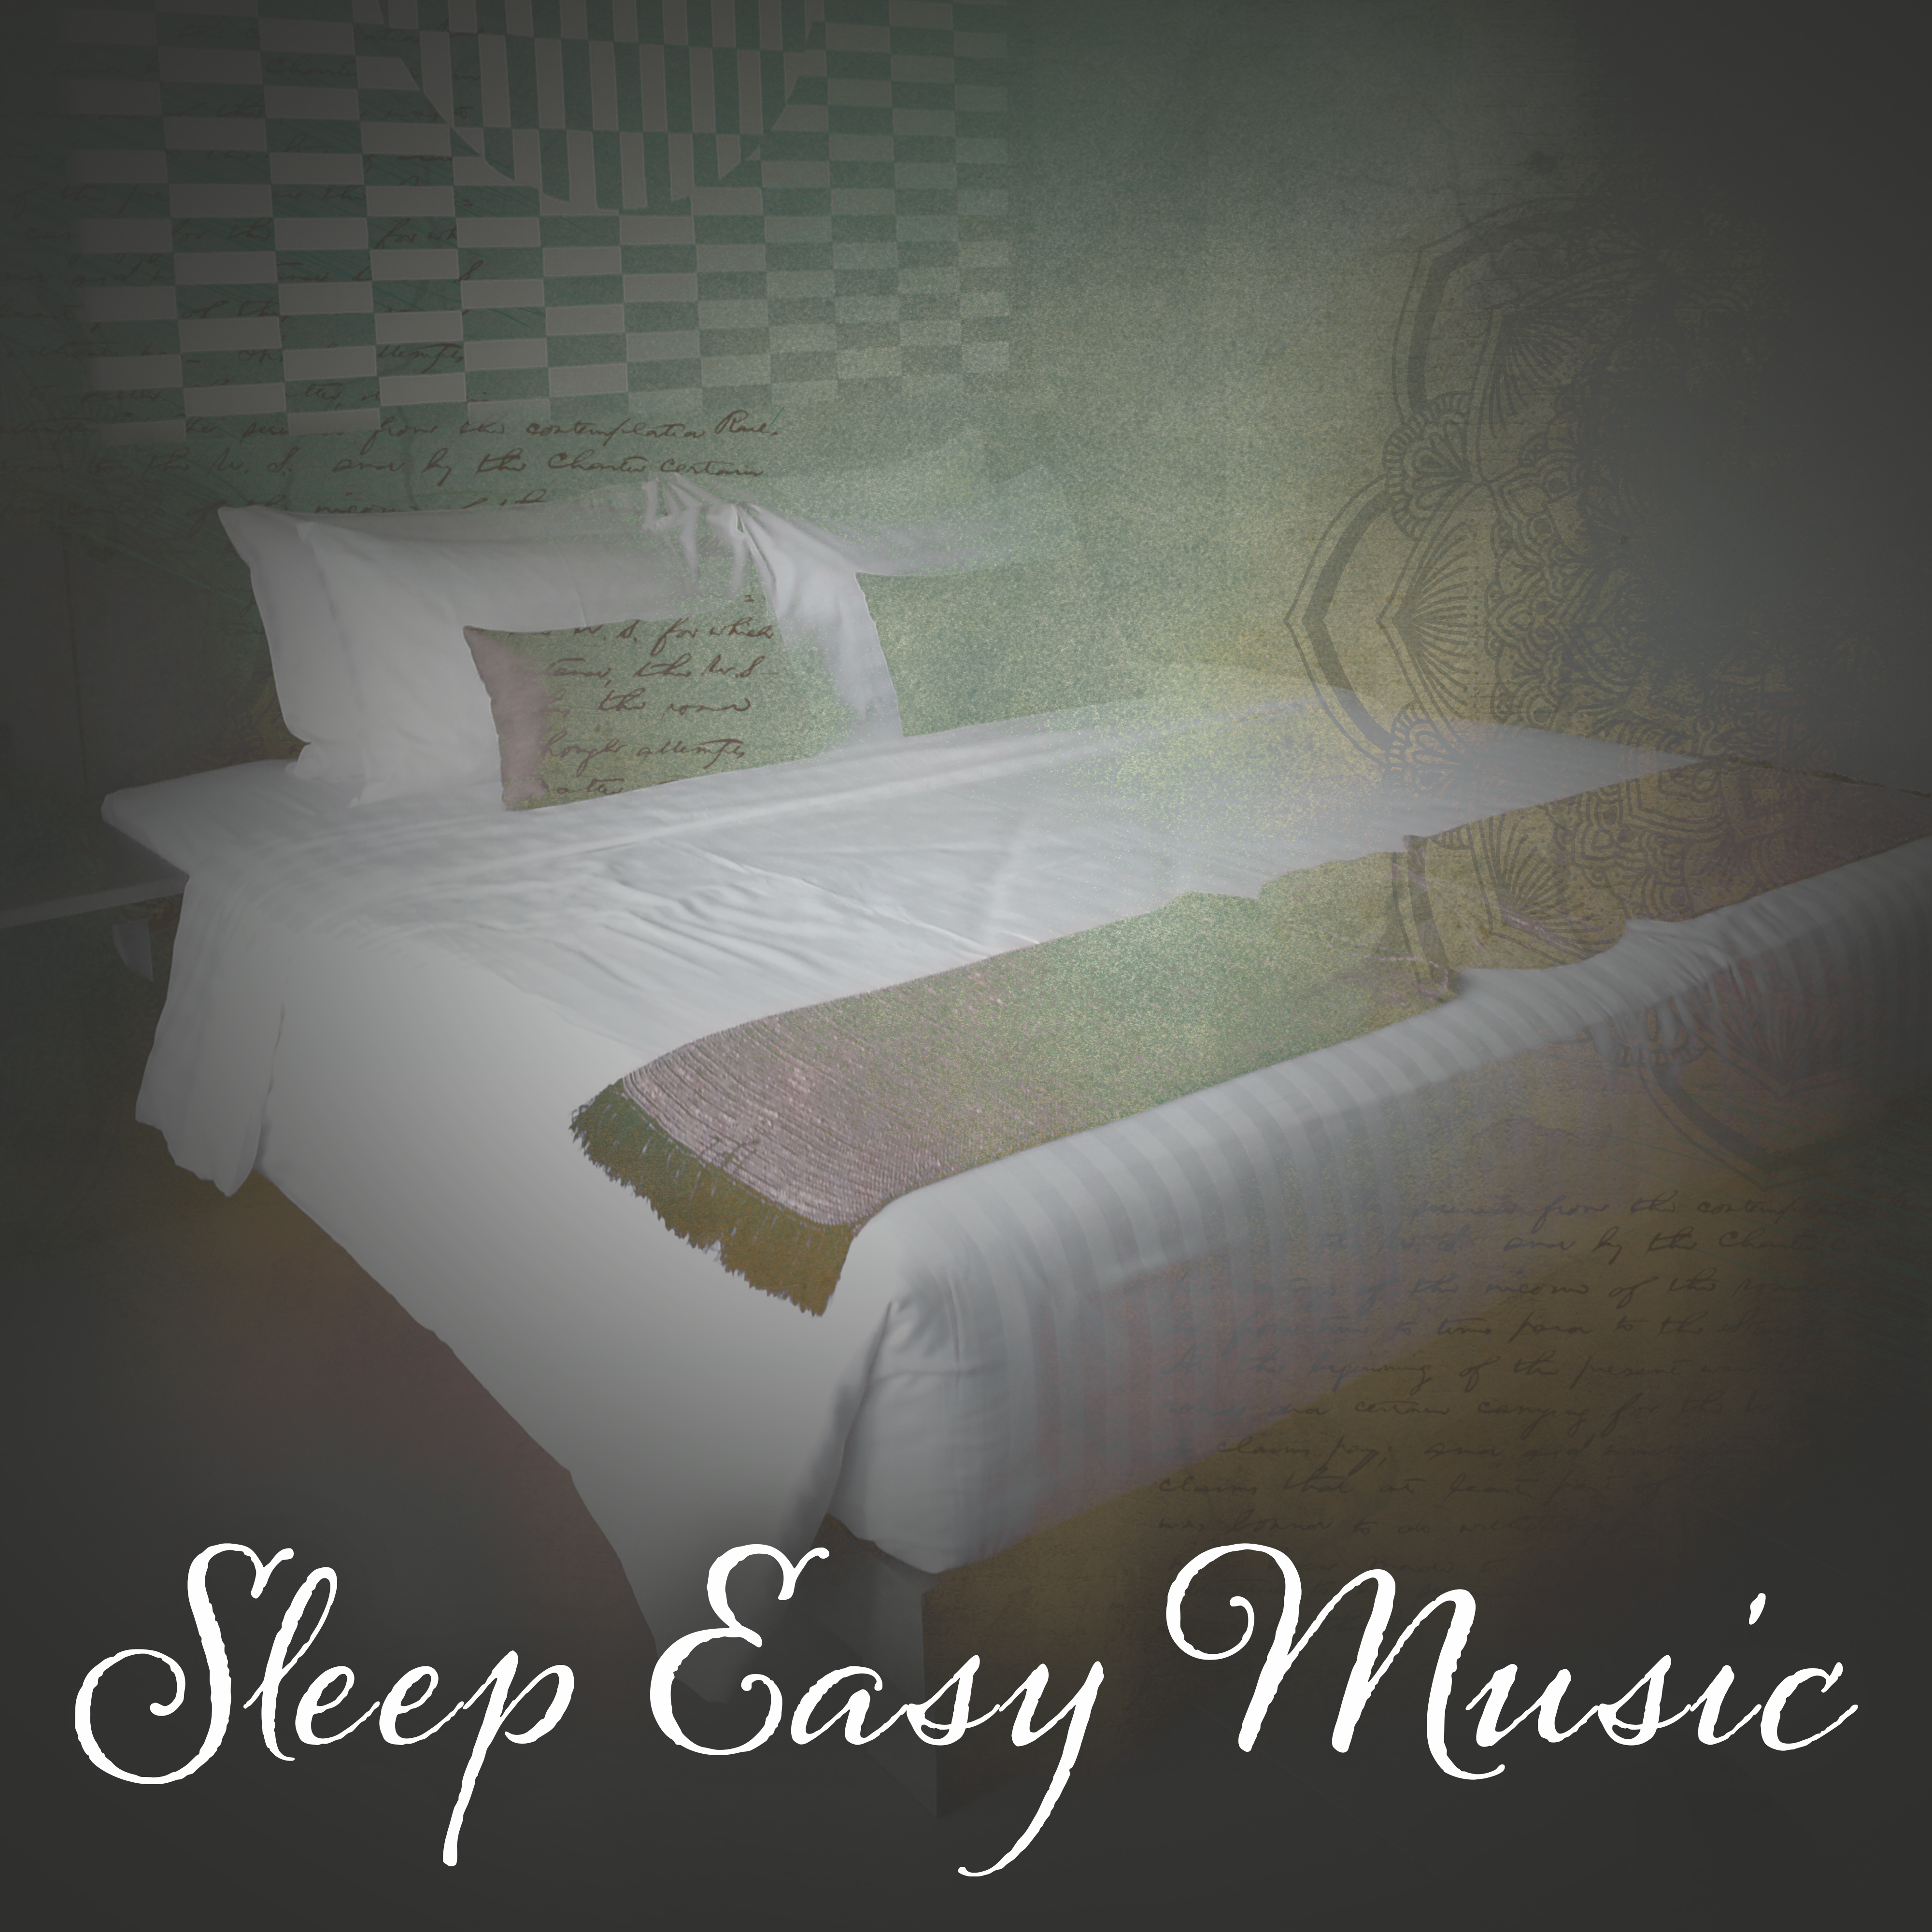 Sleep Easy Music – Soothing Songs at Goodnight, Pure Sleep, Sweet Dreams, Lullabies, Tranquility, Relaxing Therapy for Mind